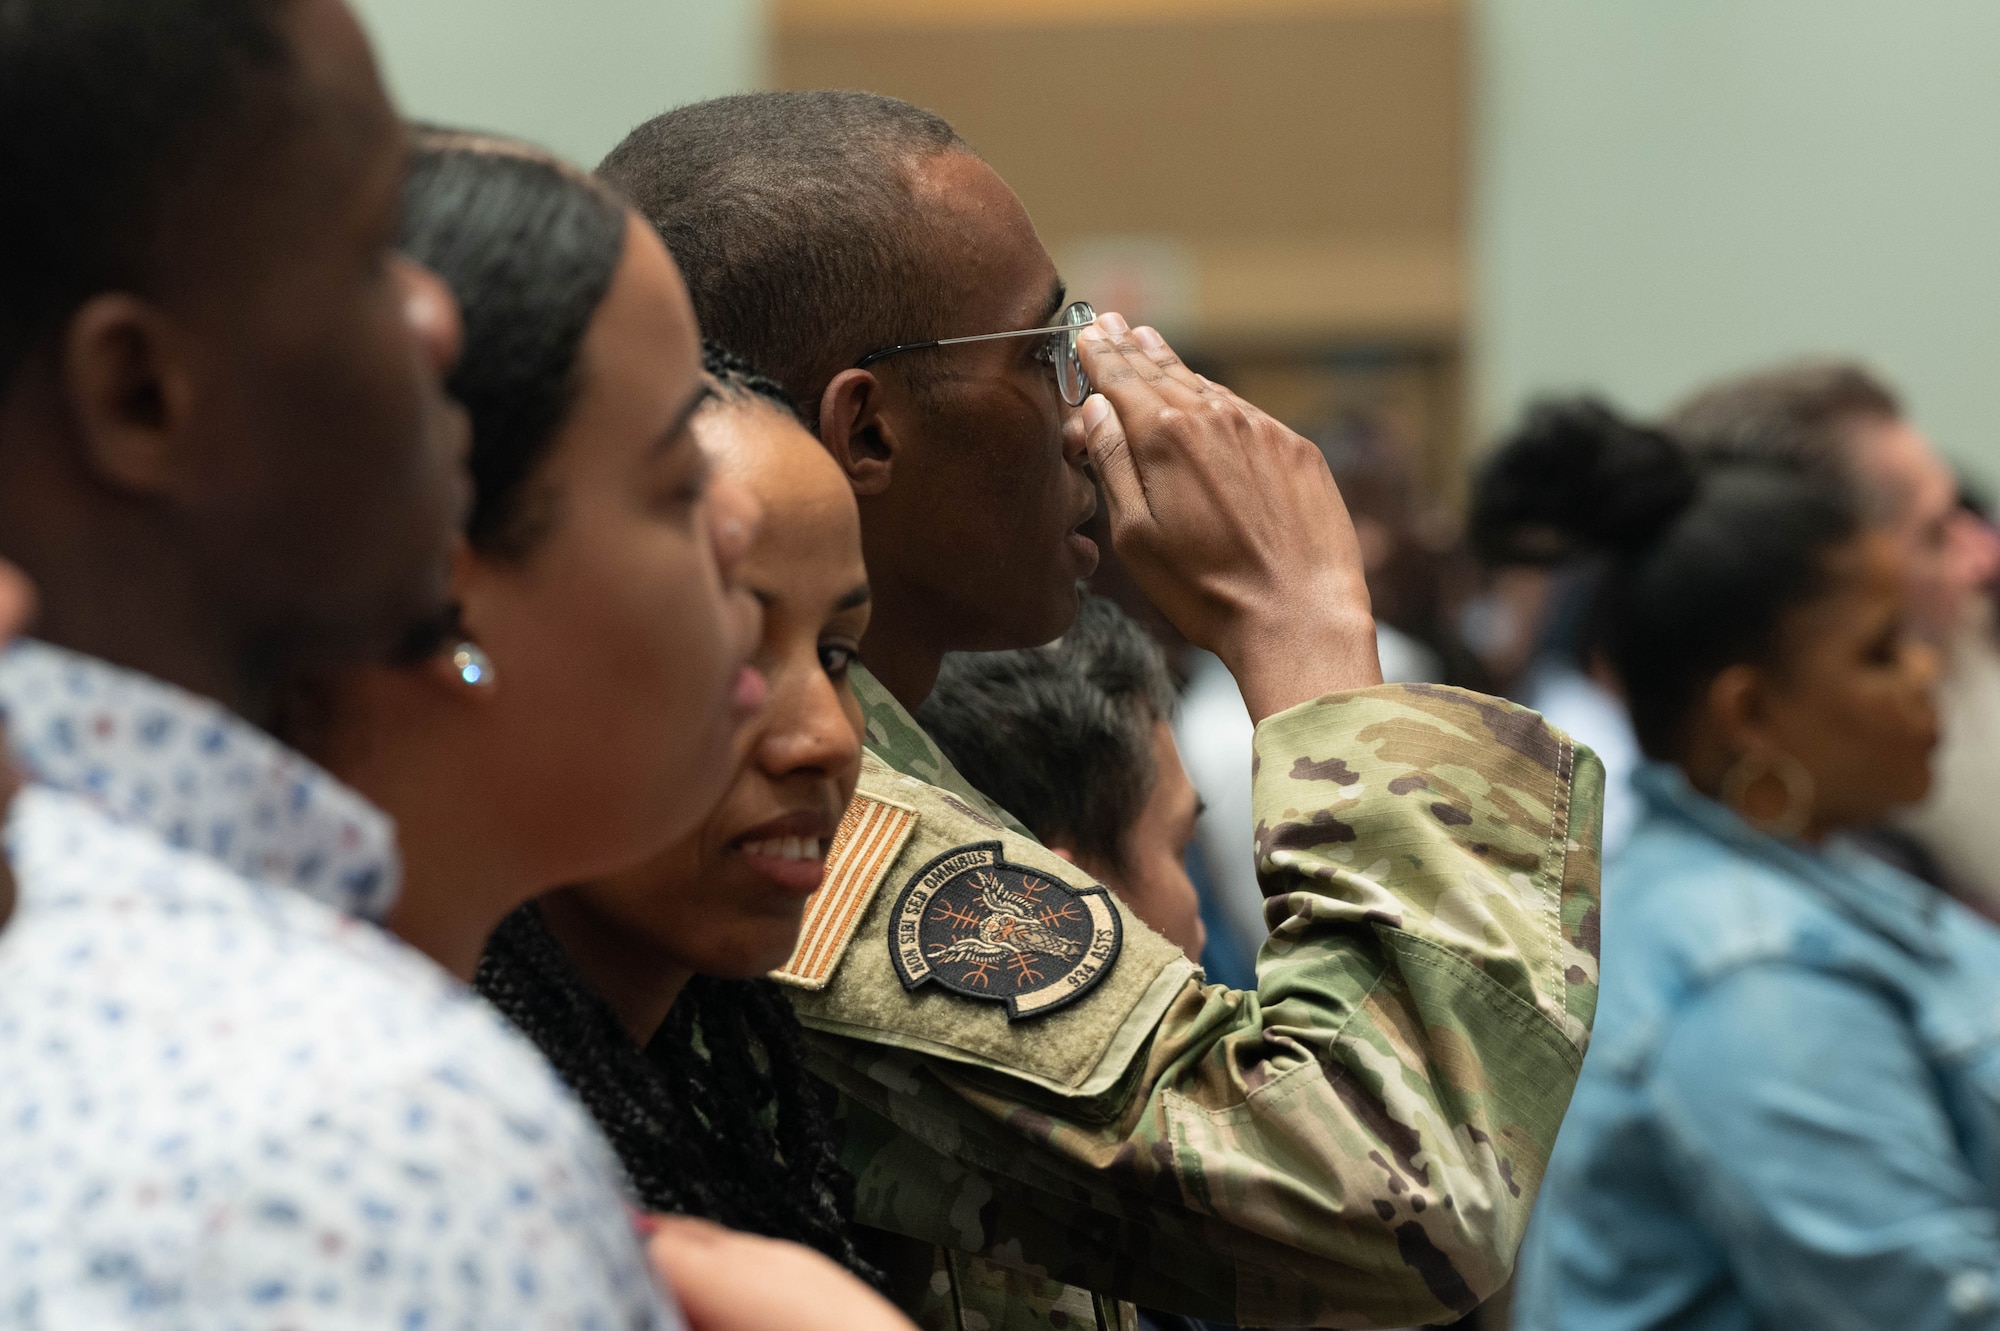 Senior Airman Mohammed Abdi, 934th Aeromedical Staging Squadron medical technician, renders a salute during the National Anthem at his naturalization ceremony at the Xcel Energy Center, St. Paul, Minn., July 14, 2023. Before Abdi became an American, he took the Oath of Enlistment in 2020 to join the Air Force Reserve and become an Airman in the 934th Airlift Wing.